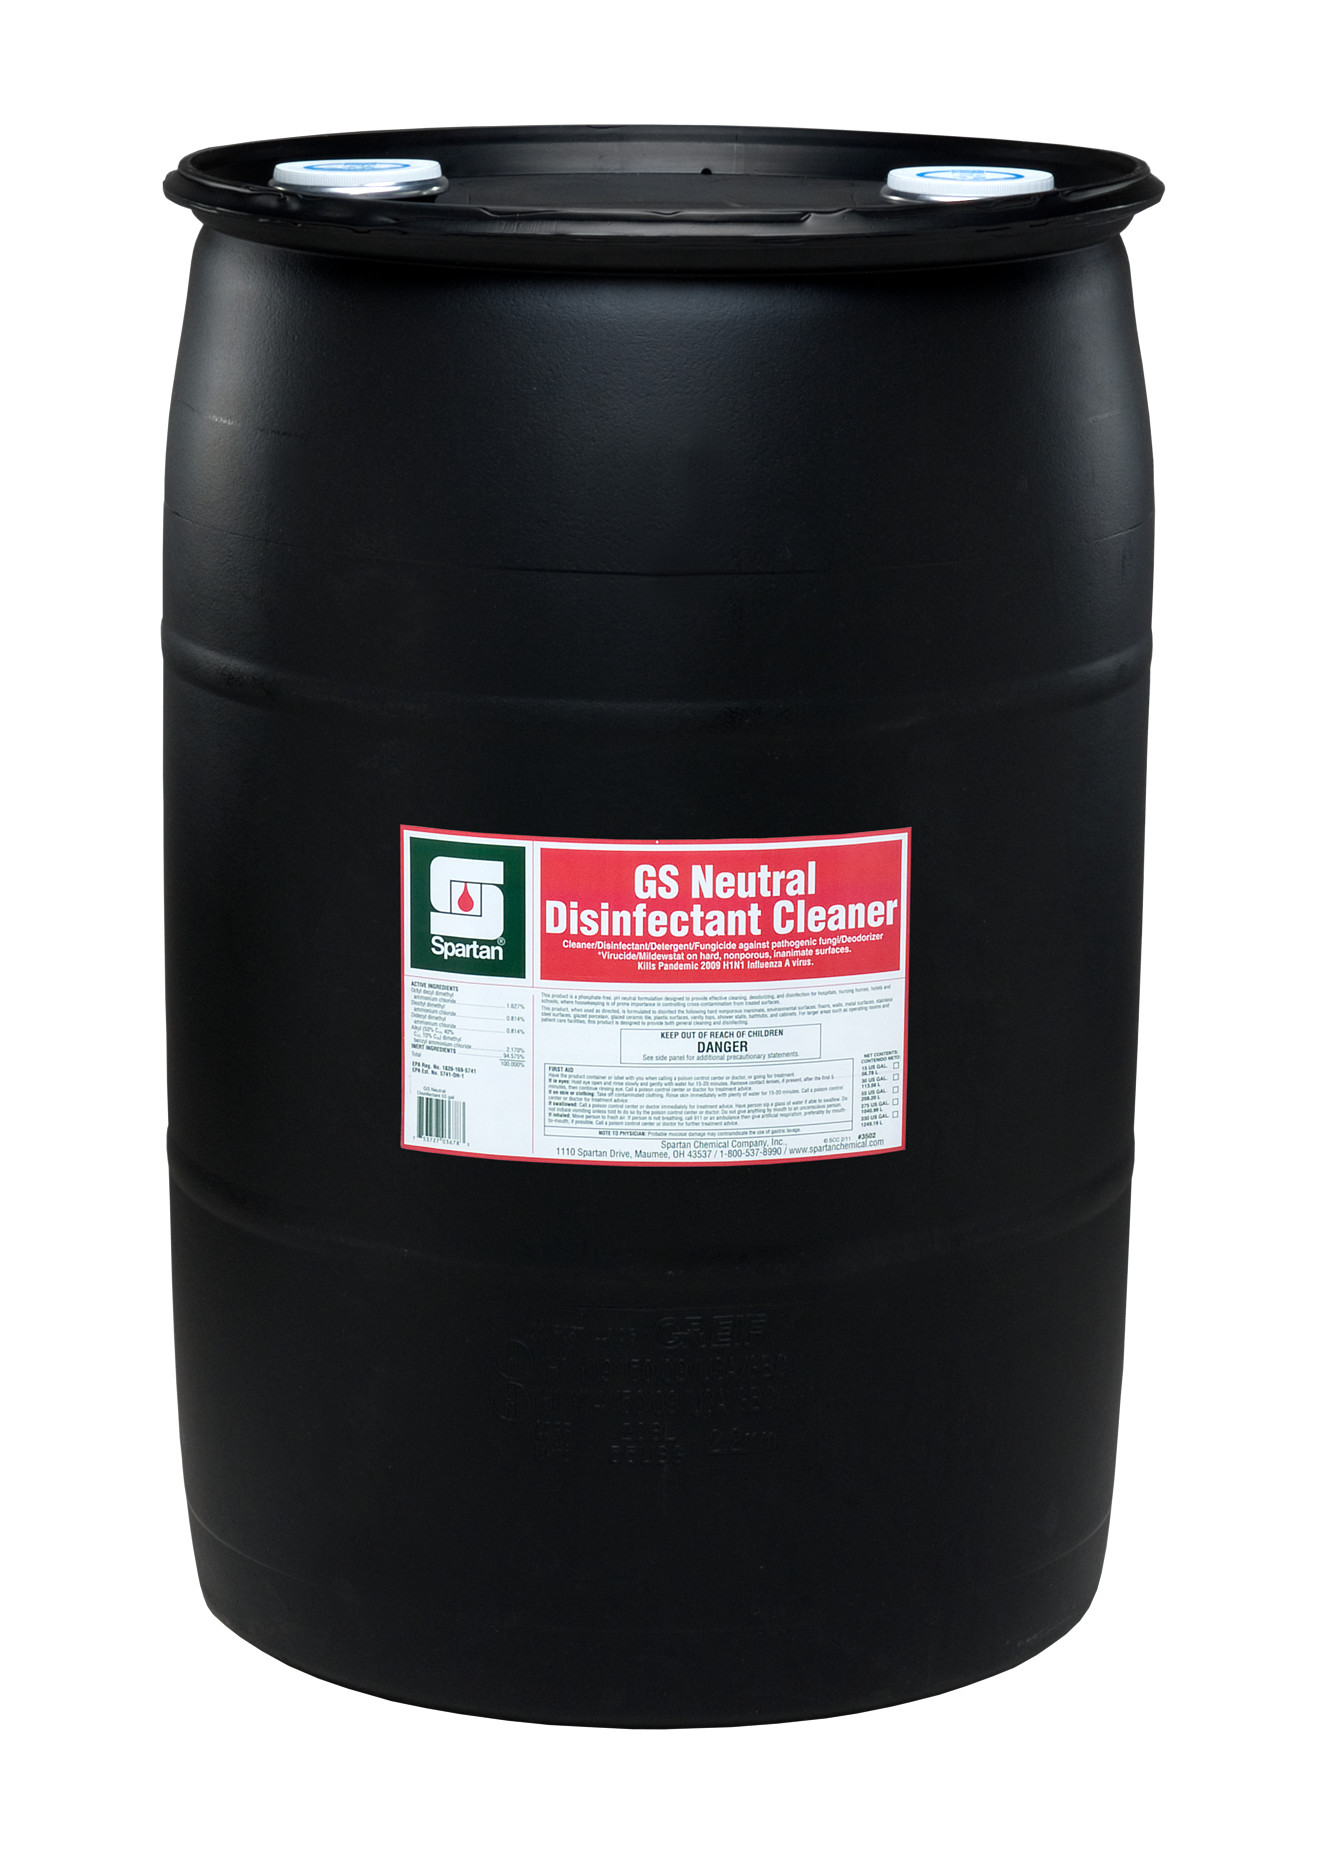 Spartan Chemical Company GS Neutral Disinfectant Cleaner, 55 GAL DRUM